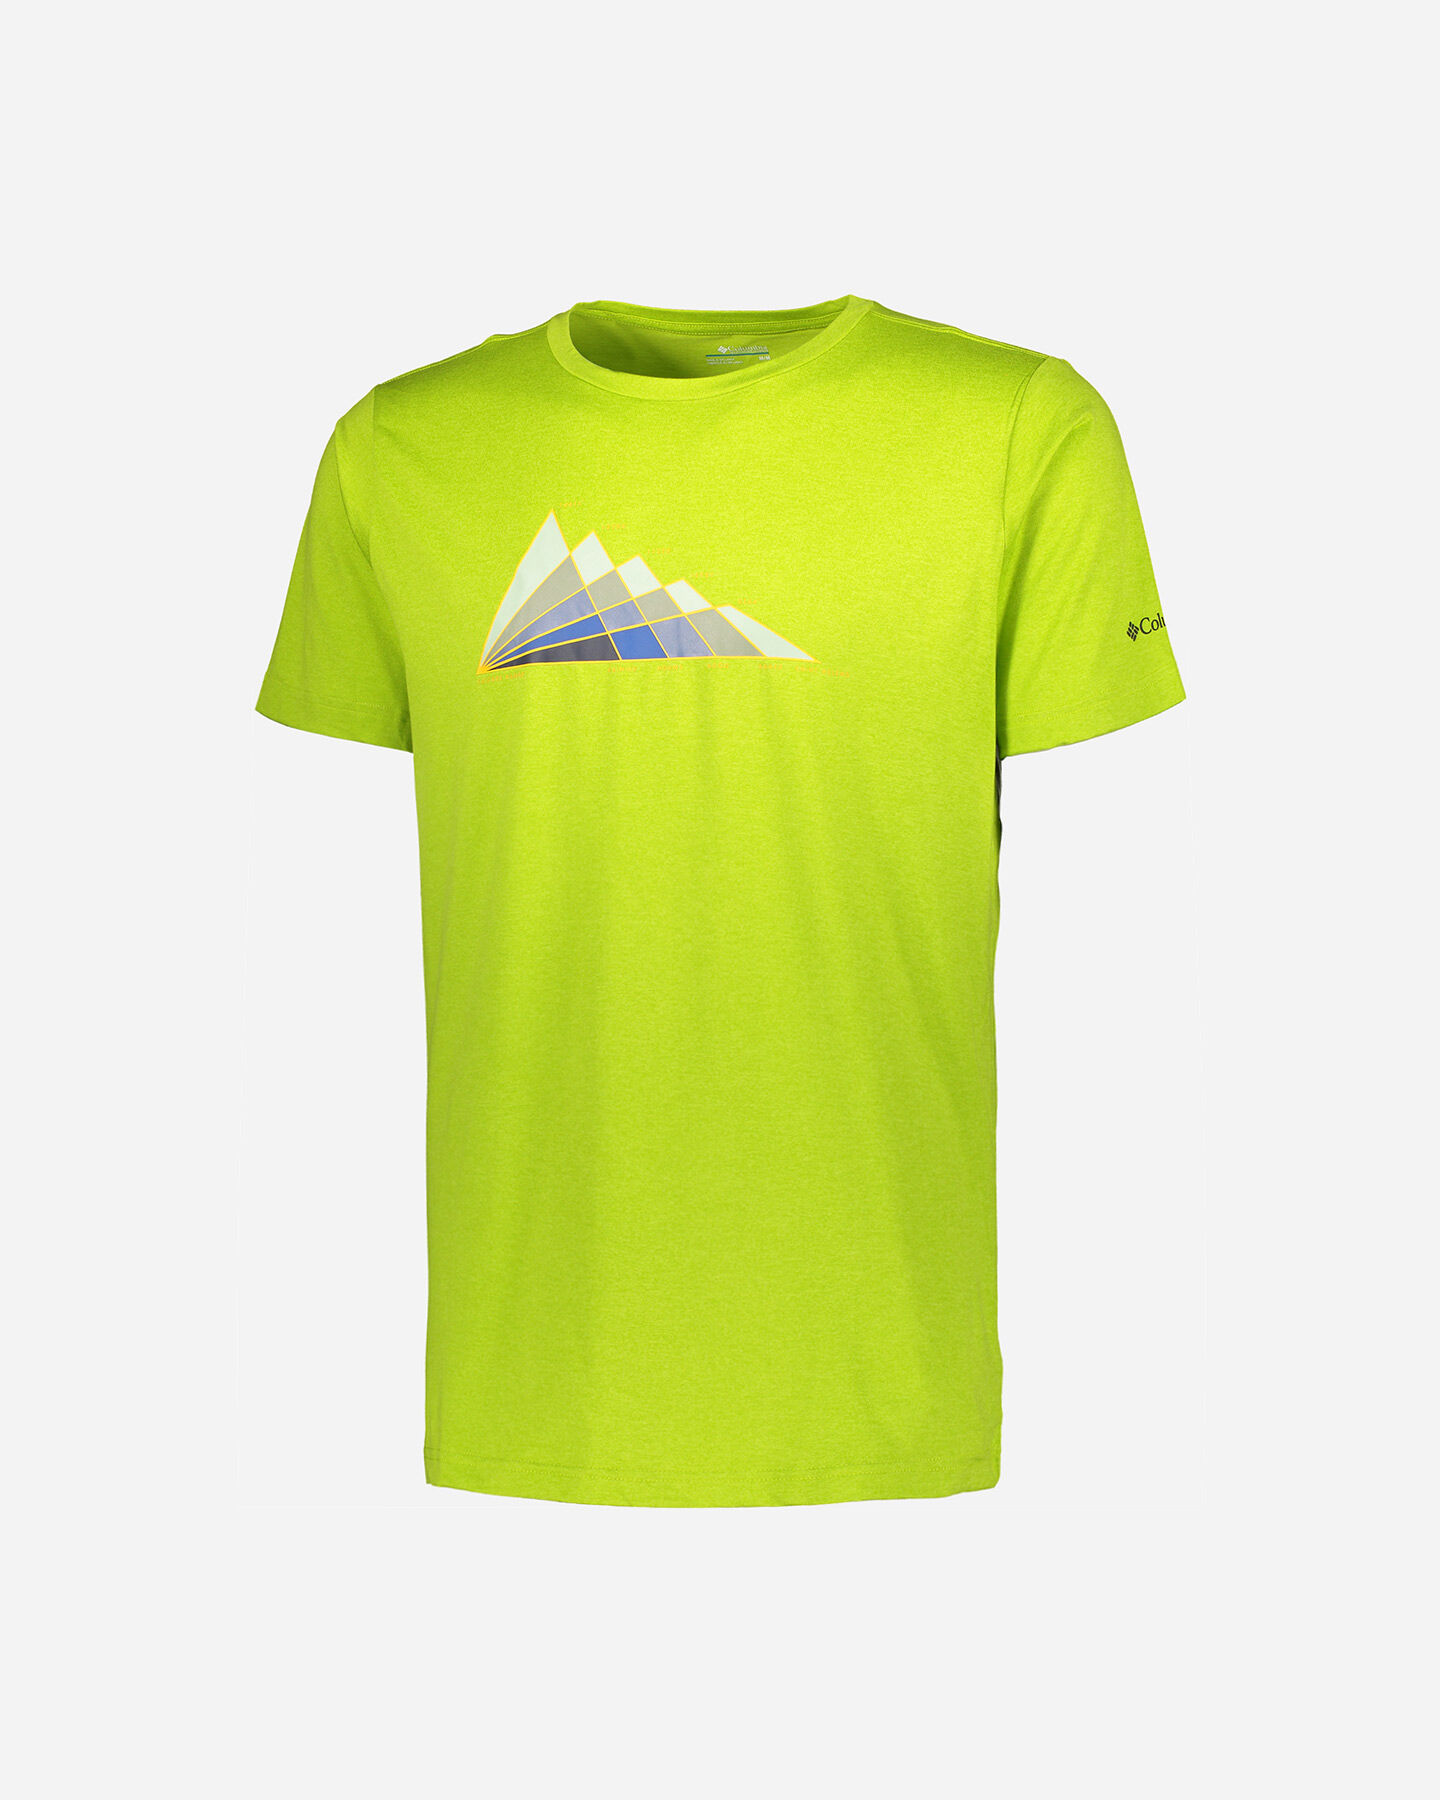  T-Shirt COLUMBIA TECH TRAIL GRAPHIC M S5291753|352|S scatto 0